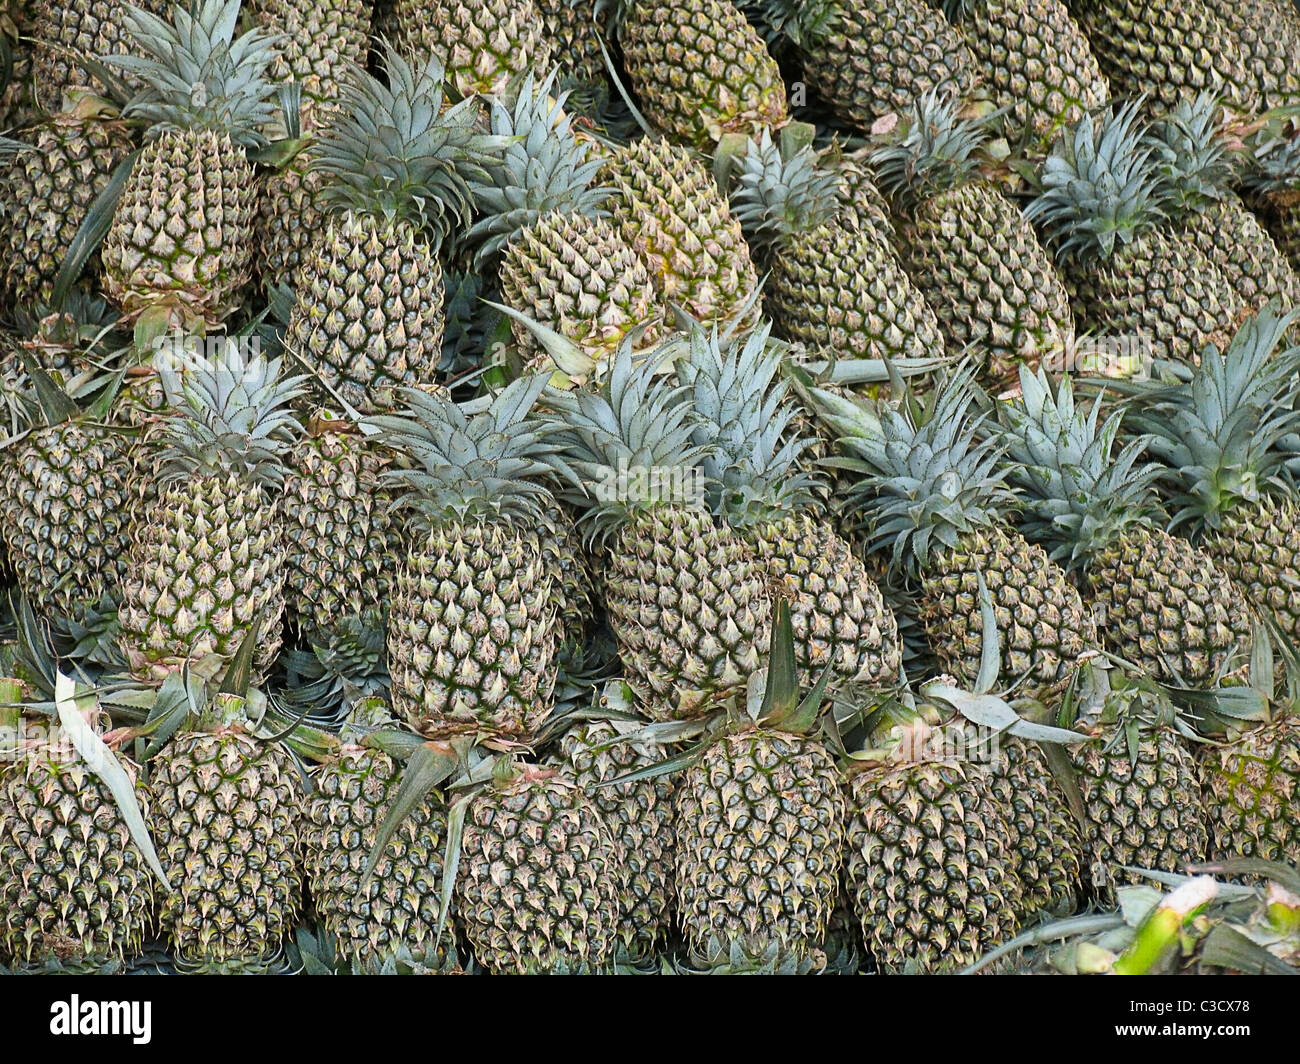 Pineapples, Ananas comosus, Bromeliaceae arranged at market for sell Stock Photo